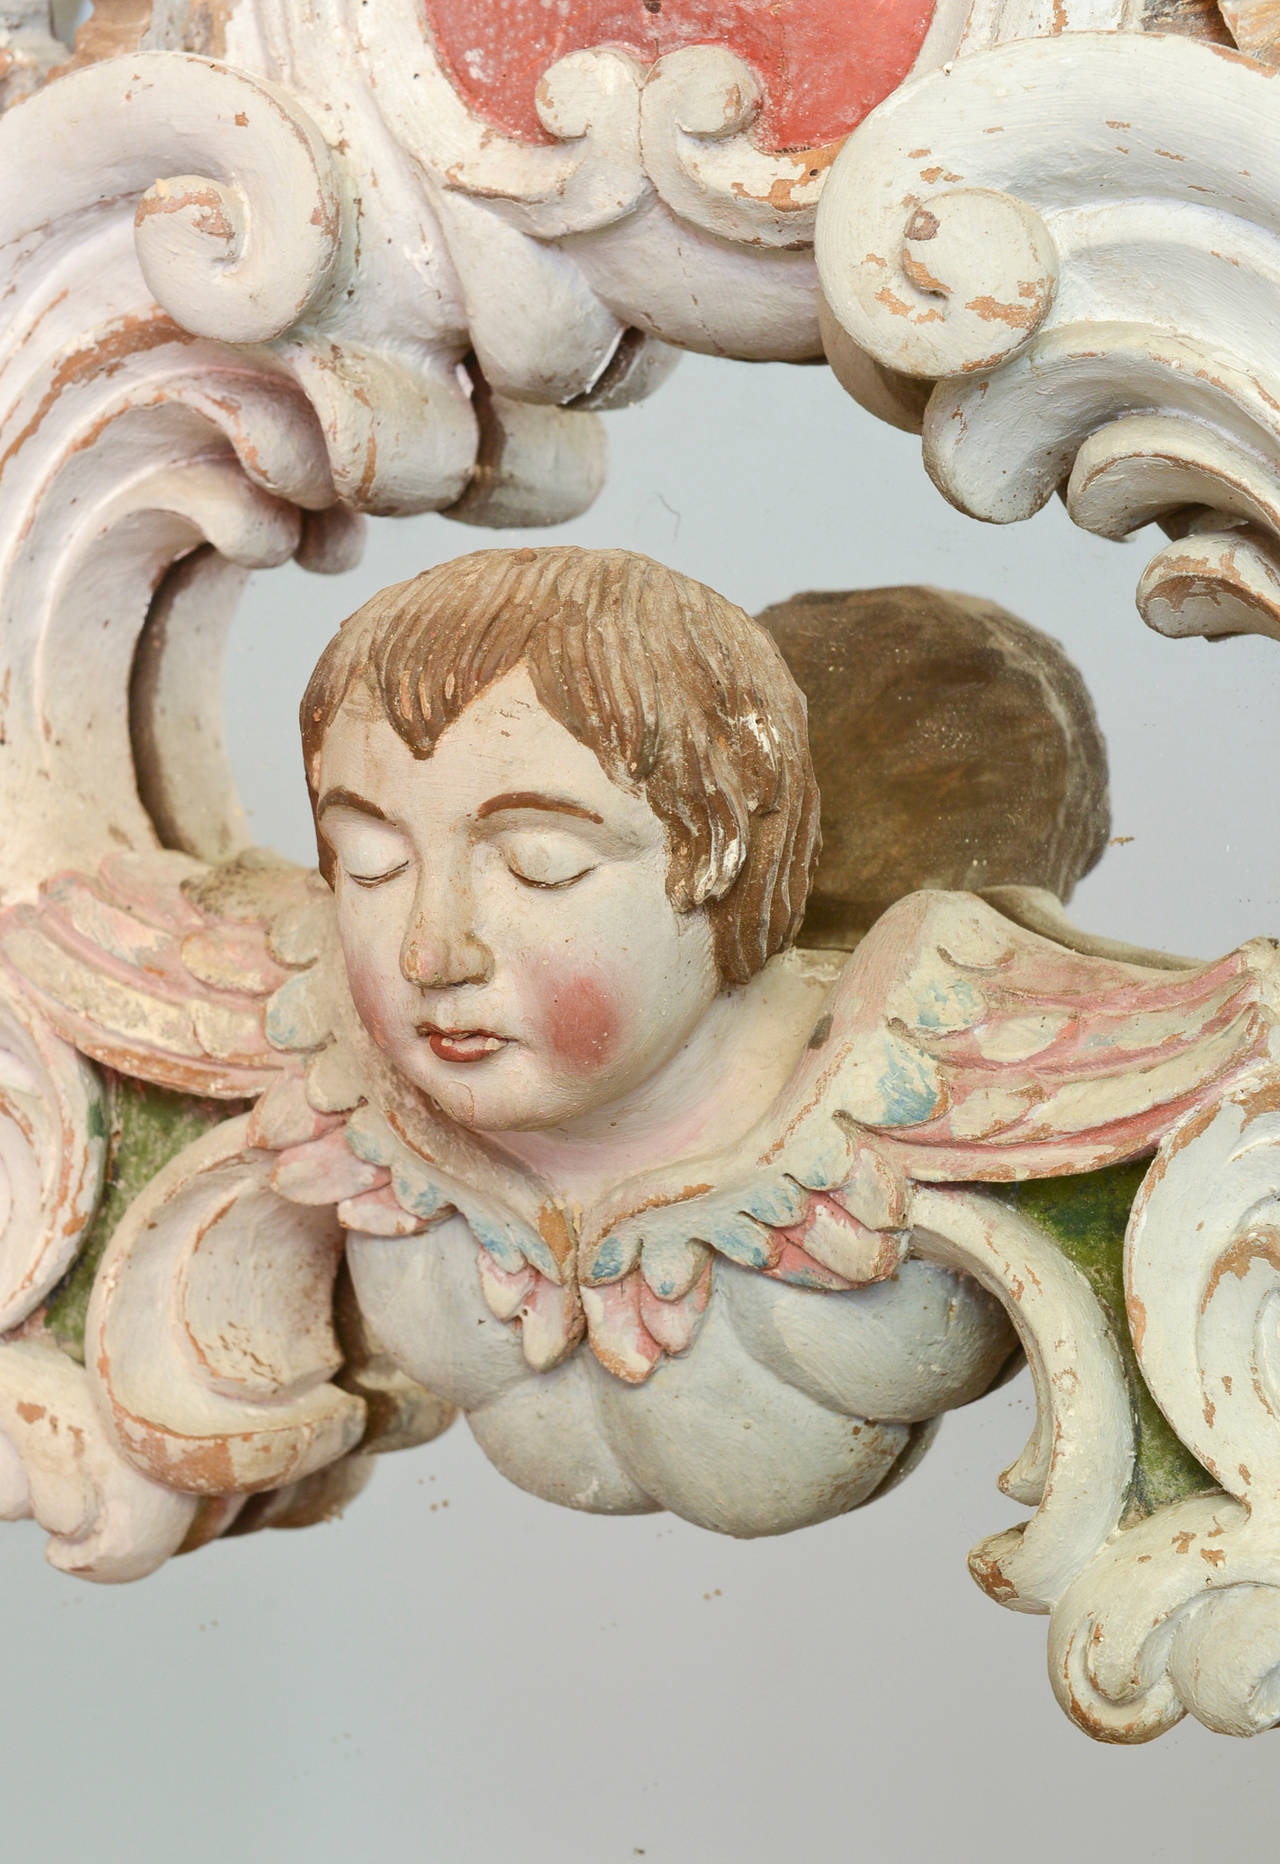 19th century antique hand-carved Venetian mirror. This Italian Rococo style frame is carved in a beautiful shell and floral motif. The centerpiece of the frame is a large carved shell featuring a carved figurehead of an angel. It is painted in